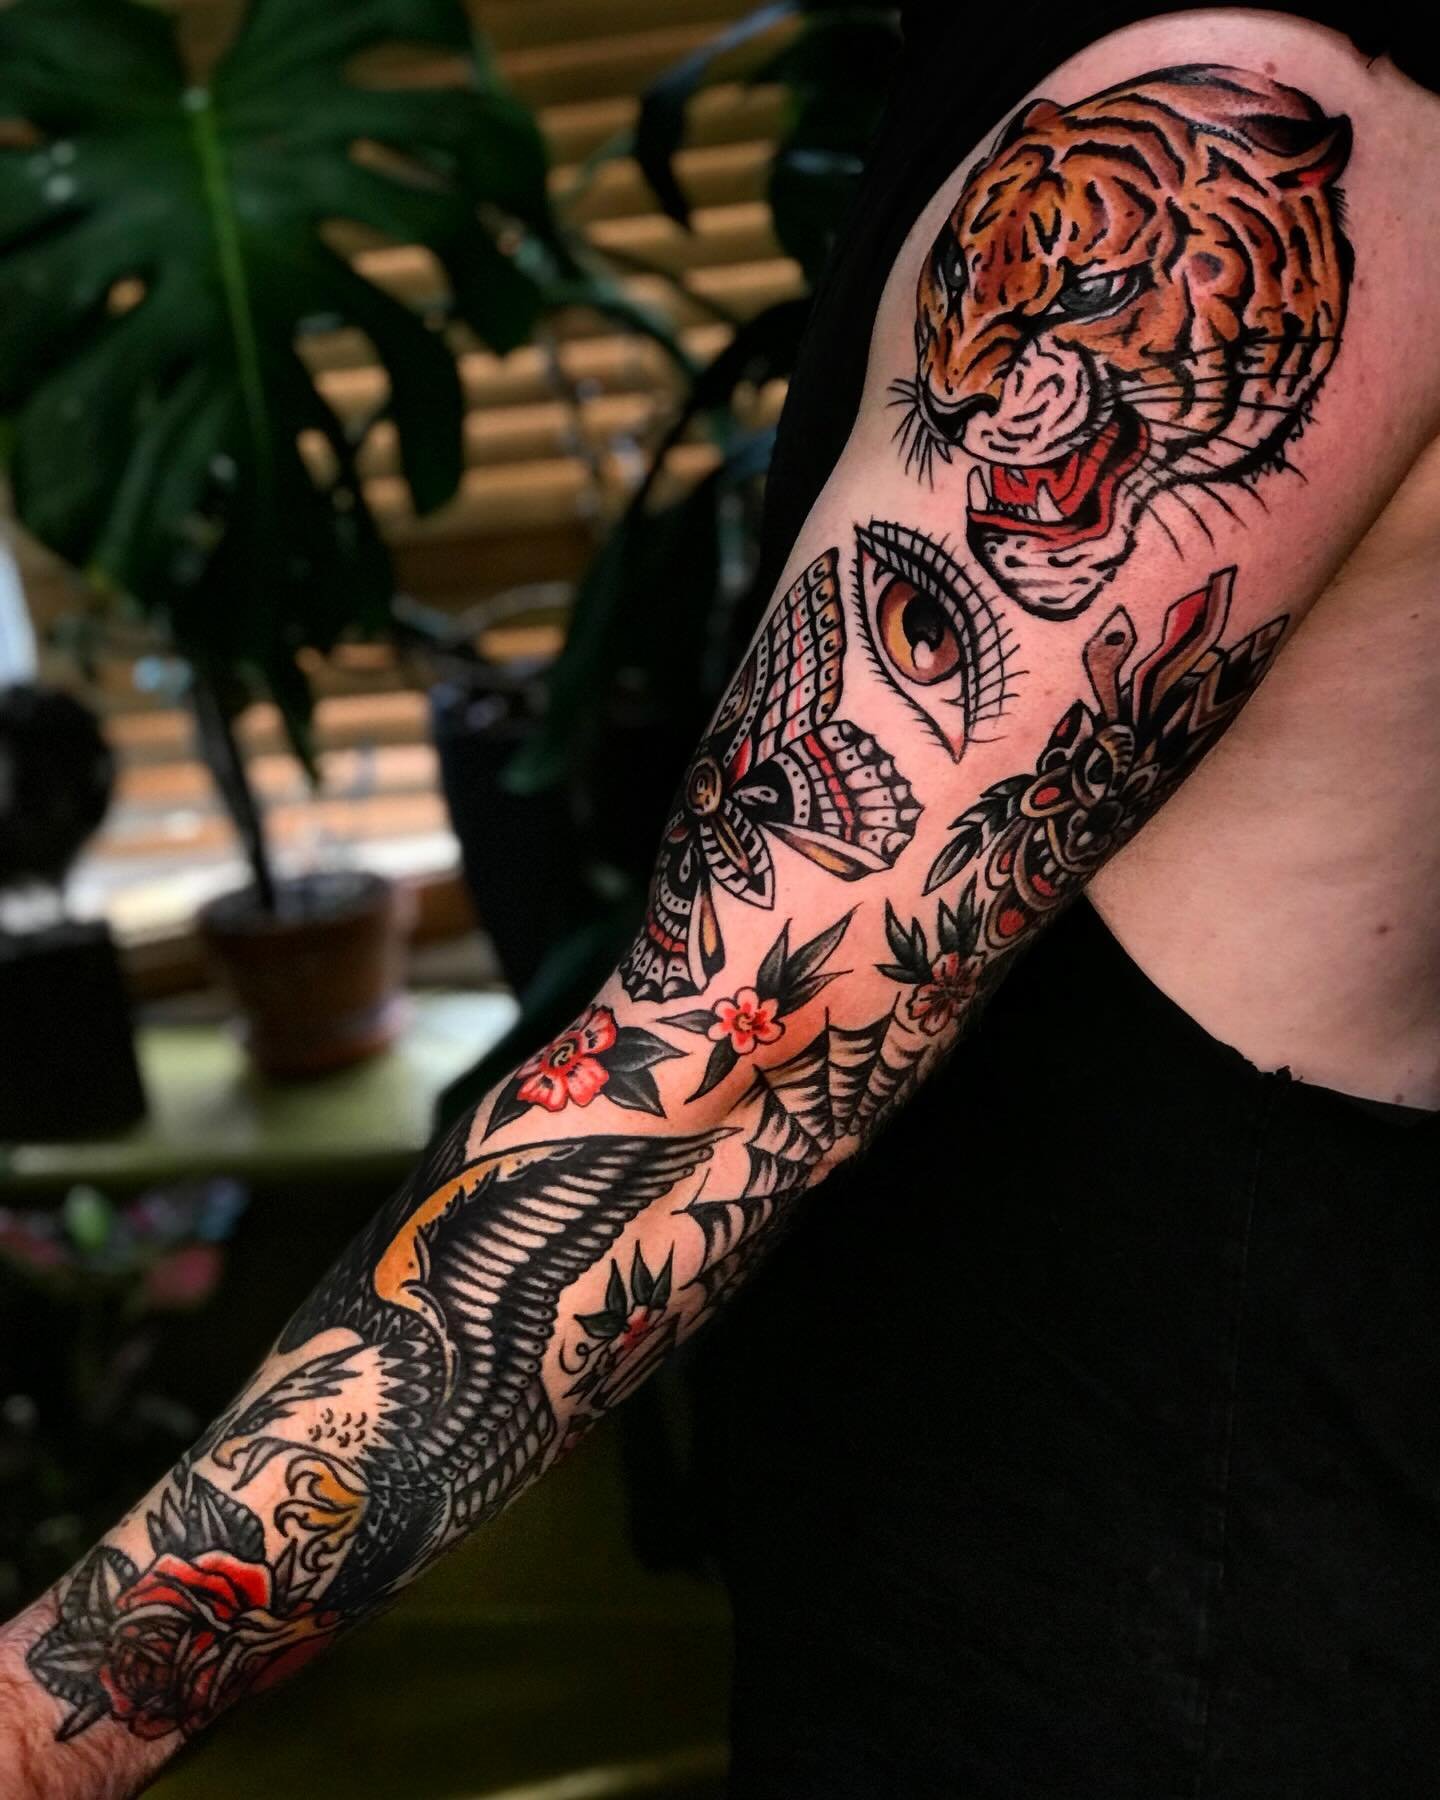 This sleeve was started around 8 years ago on my good friend @purdstagram_ and we finished it  recently. Thanks so much brother it&rsquo;s been so fun @mans_ruin_tattoo